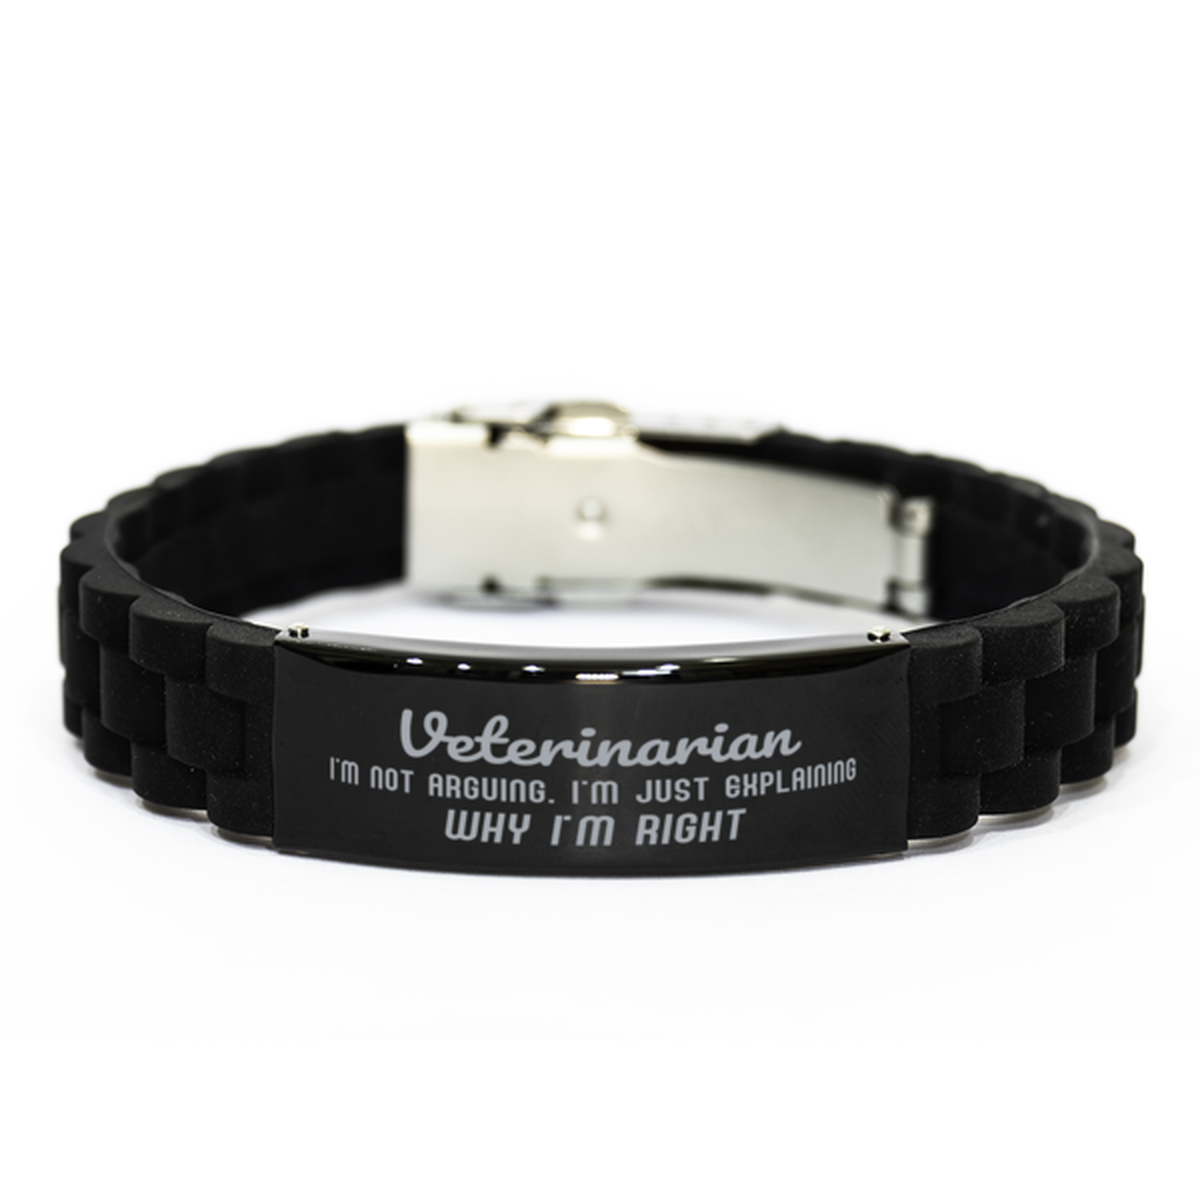 Veterinarian I'm not Arguing. I'm Just Explaining Why I'm RIGHT Black Glidelock Clasp Bracelet, Funny Saying Quote Veterinarian Gifts For Veterinarian Graduation Birthday Christmas Gifts for Men Women Coworker